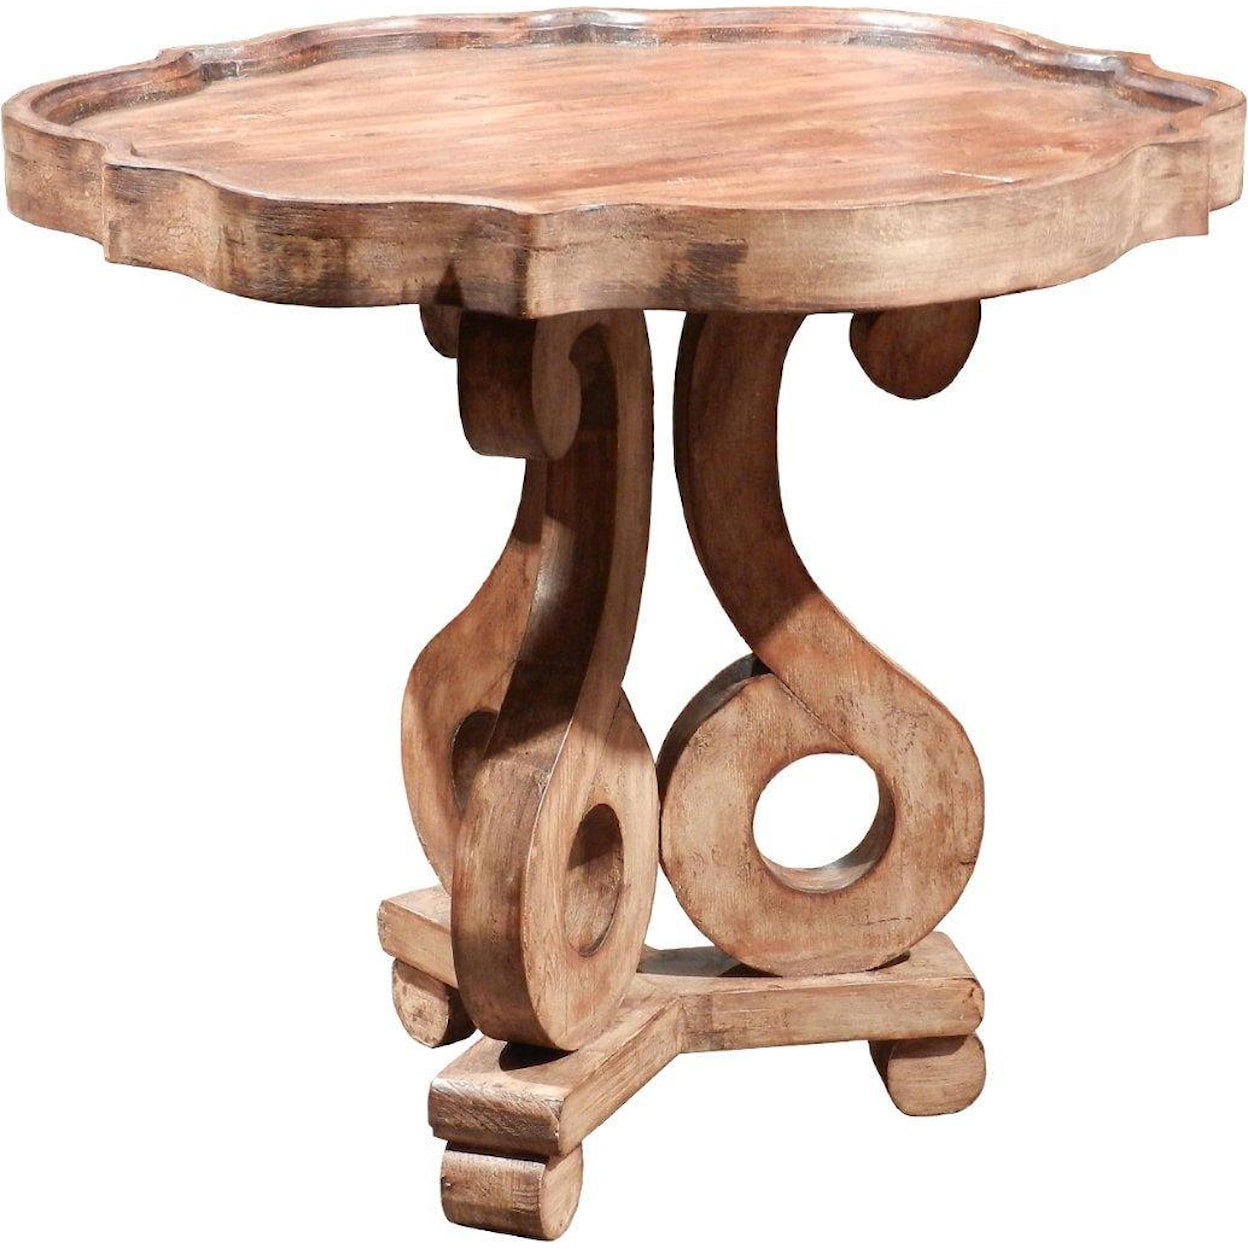 Furniture Source International Occasional Tables Cumberland Side Table